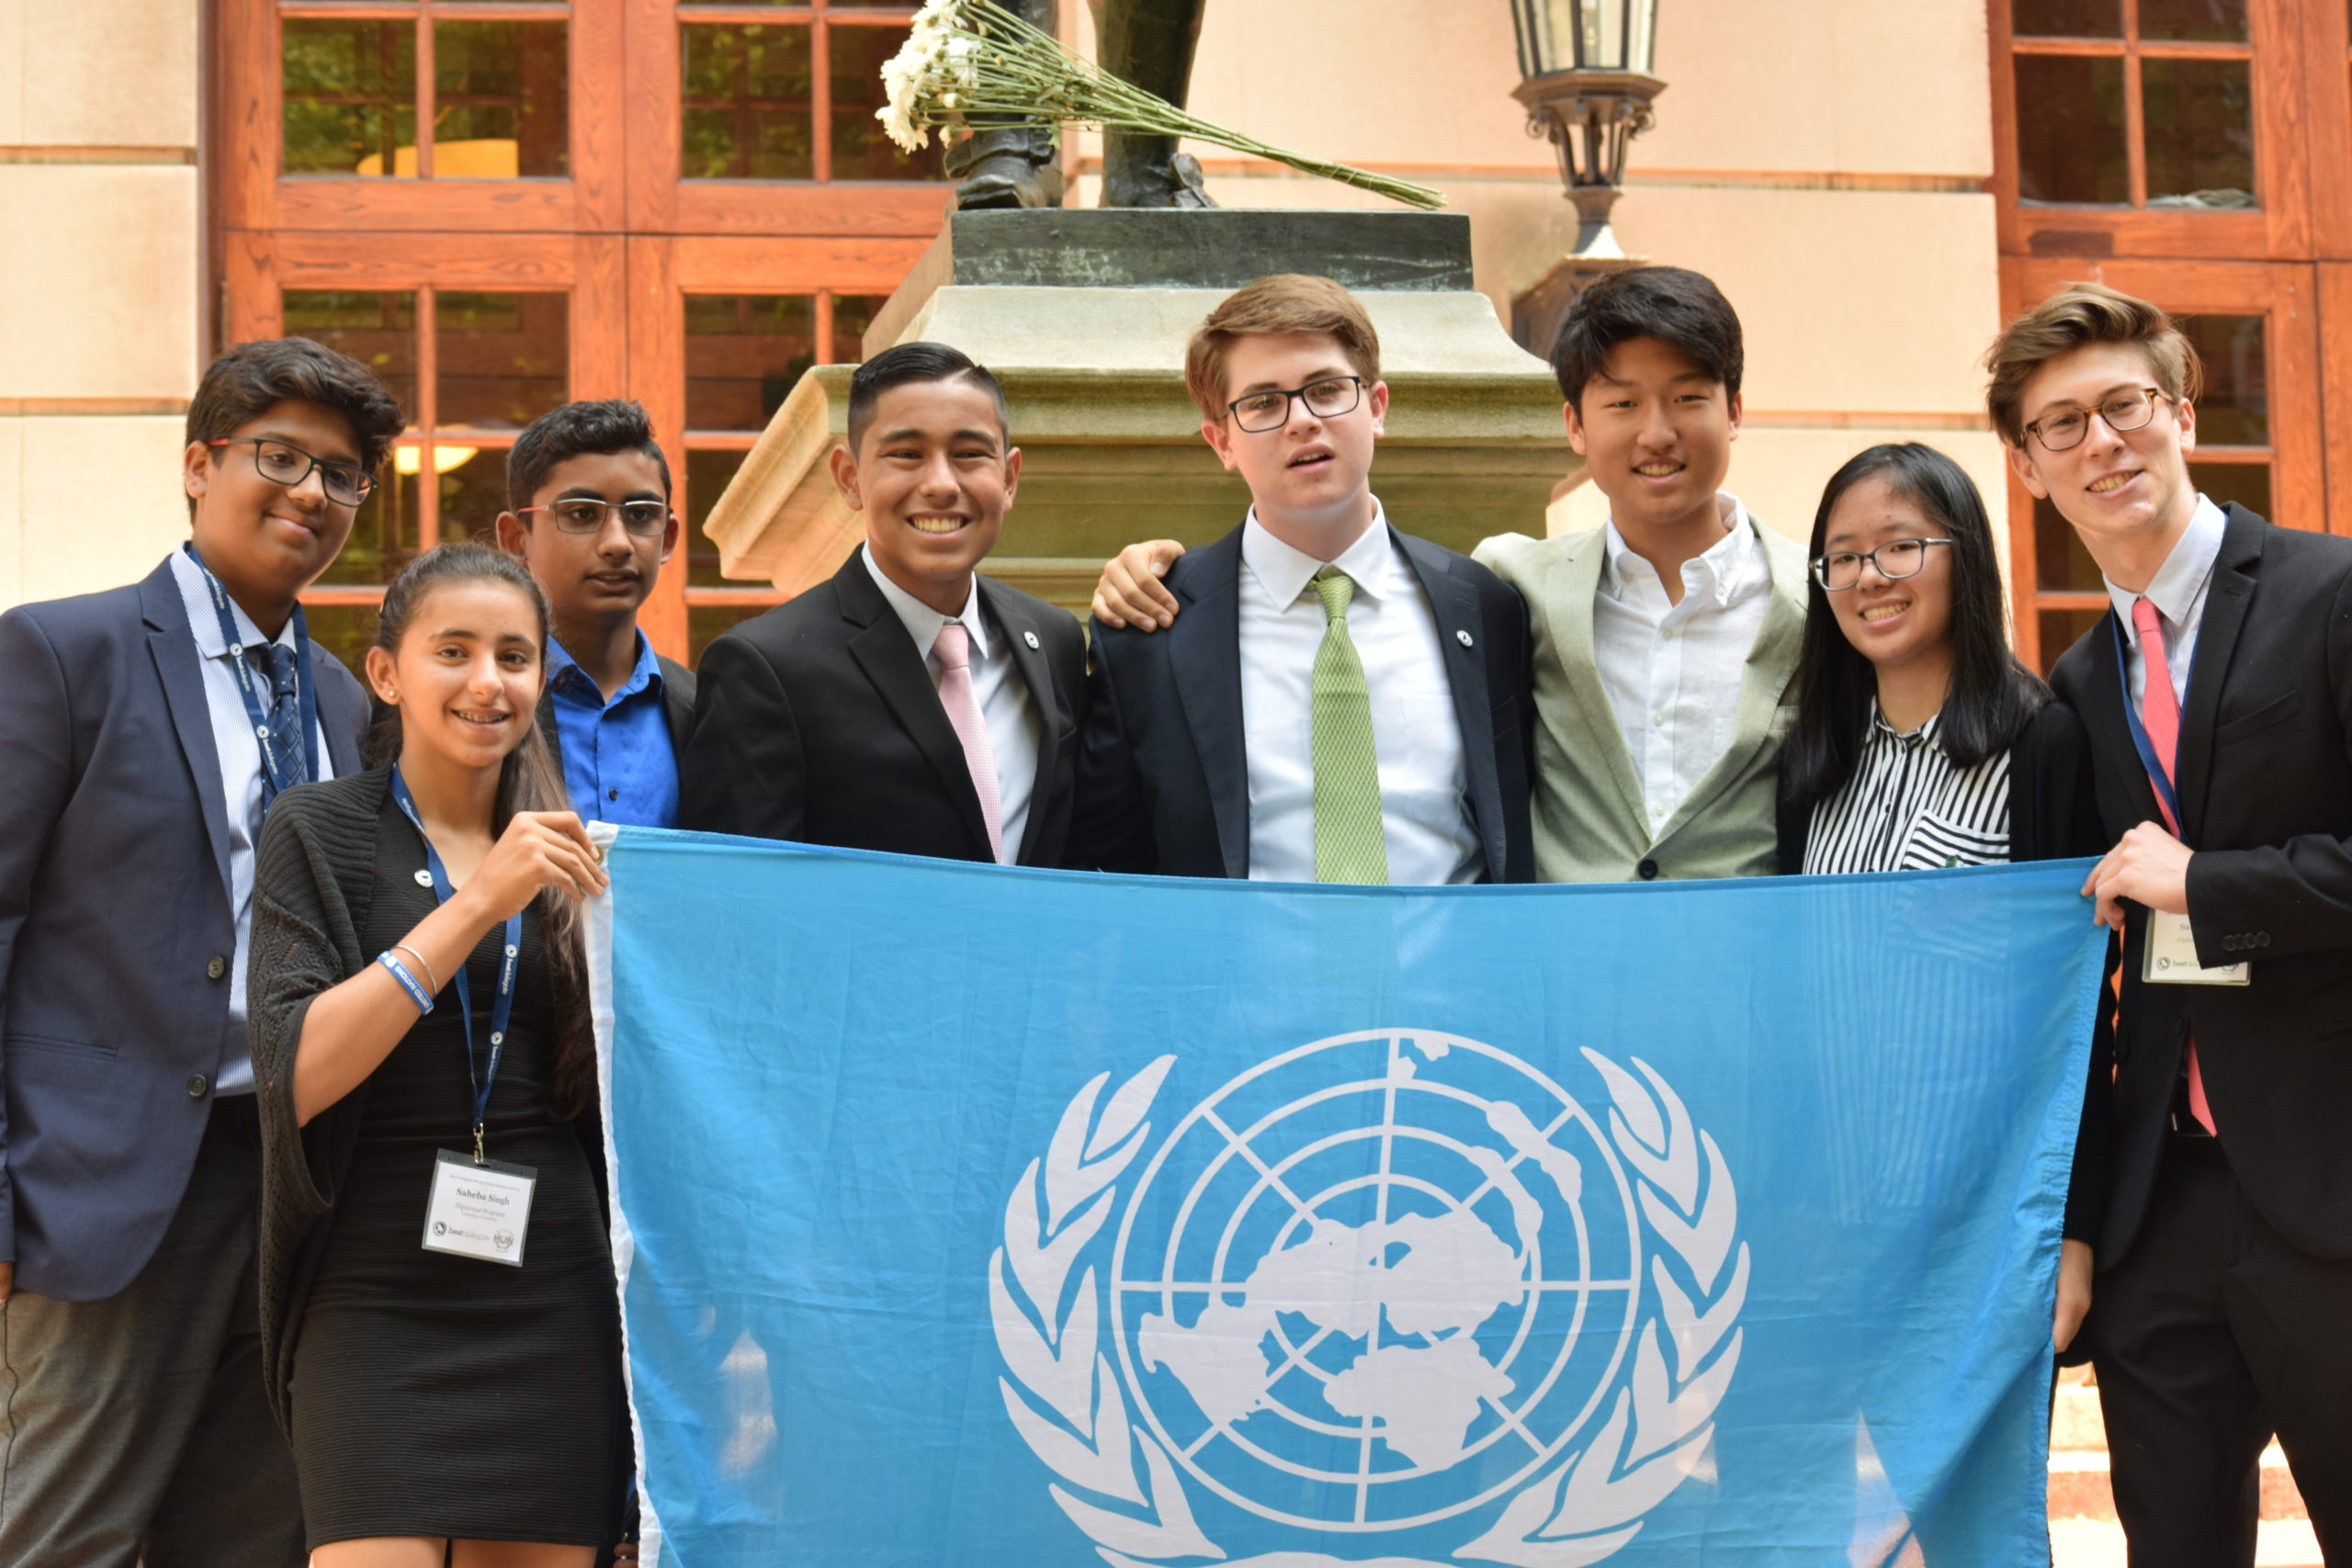 The Best High School Model UN Delegates and Club Leaders 20212022